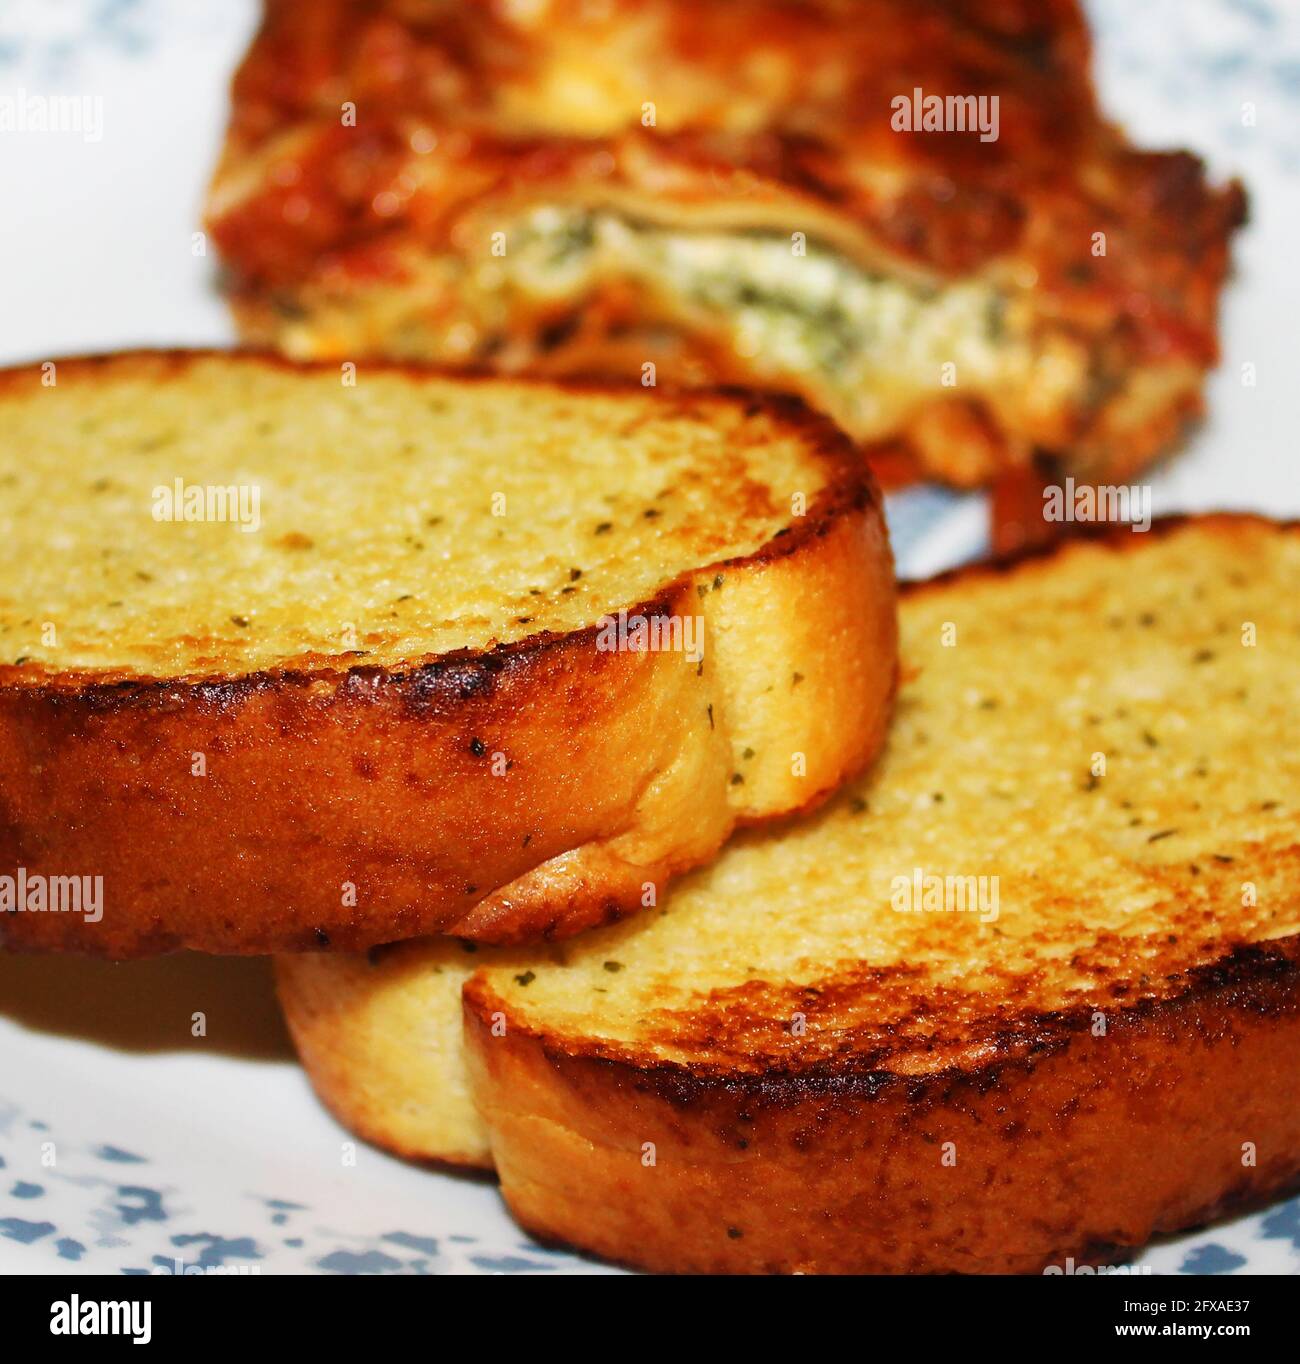 Close-up of two slices of garlic bread with a slice of homemade lasagna out of focus in background. Stock Photo